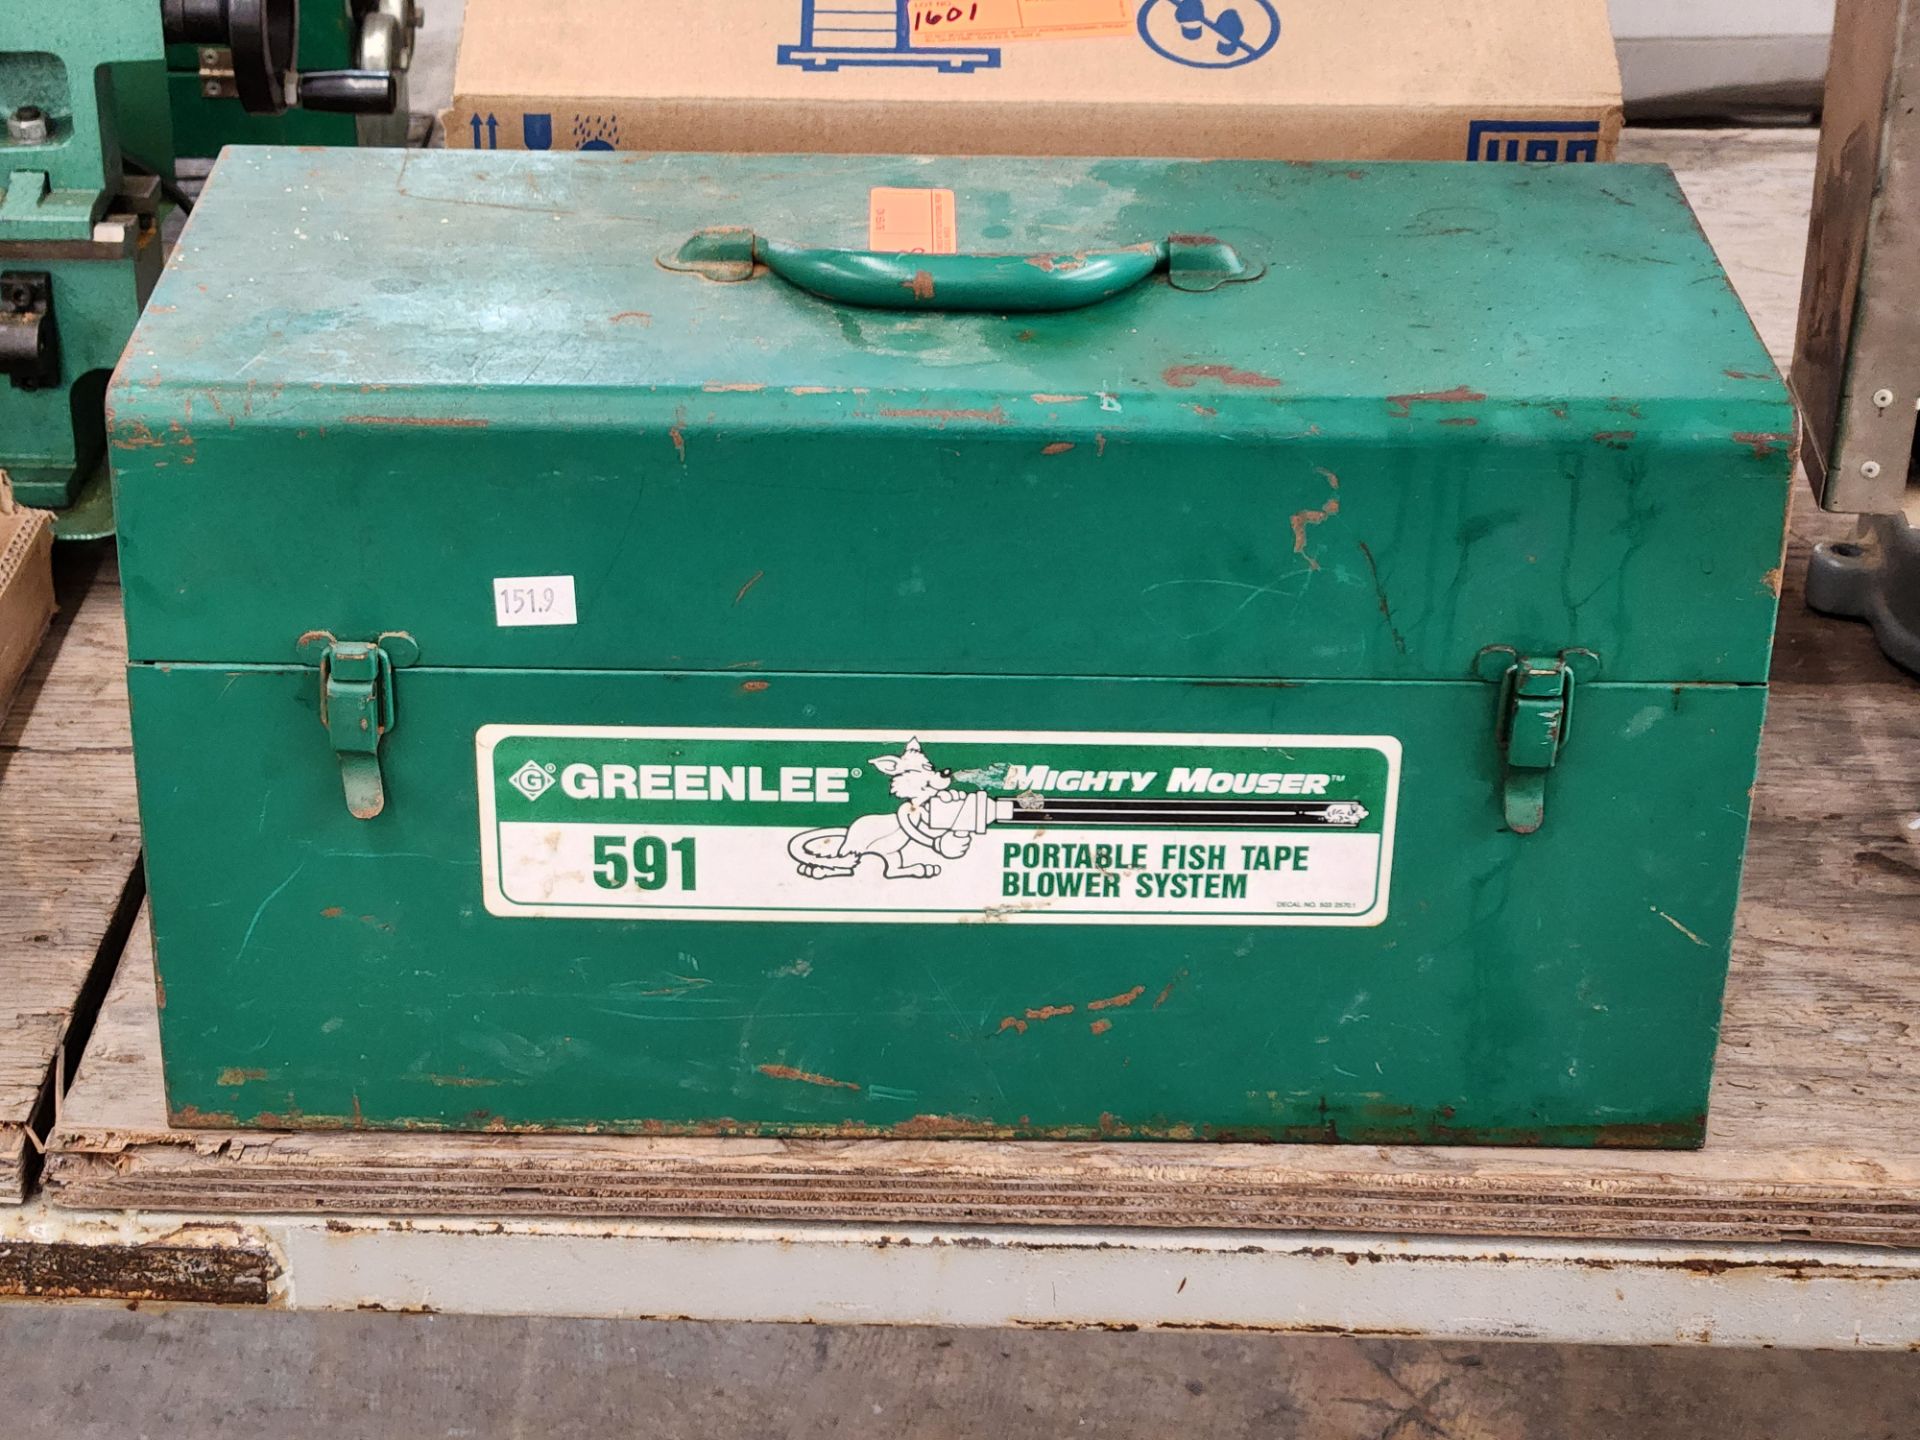 Greenlee 591 Portable Fish Tape Blower System